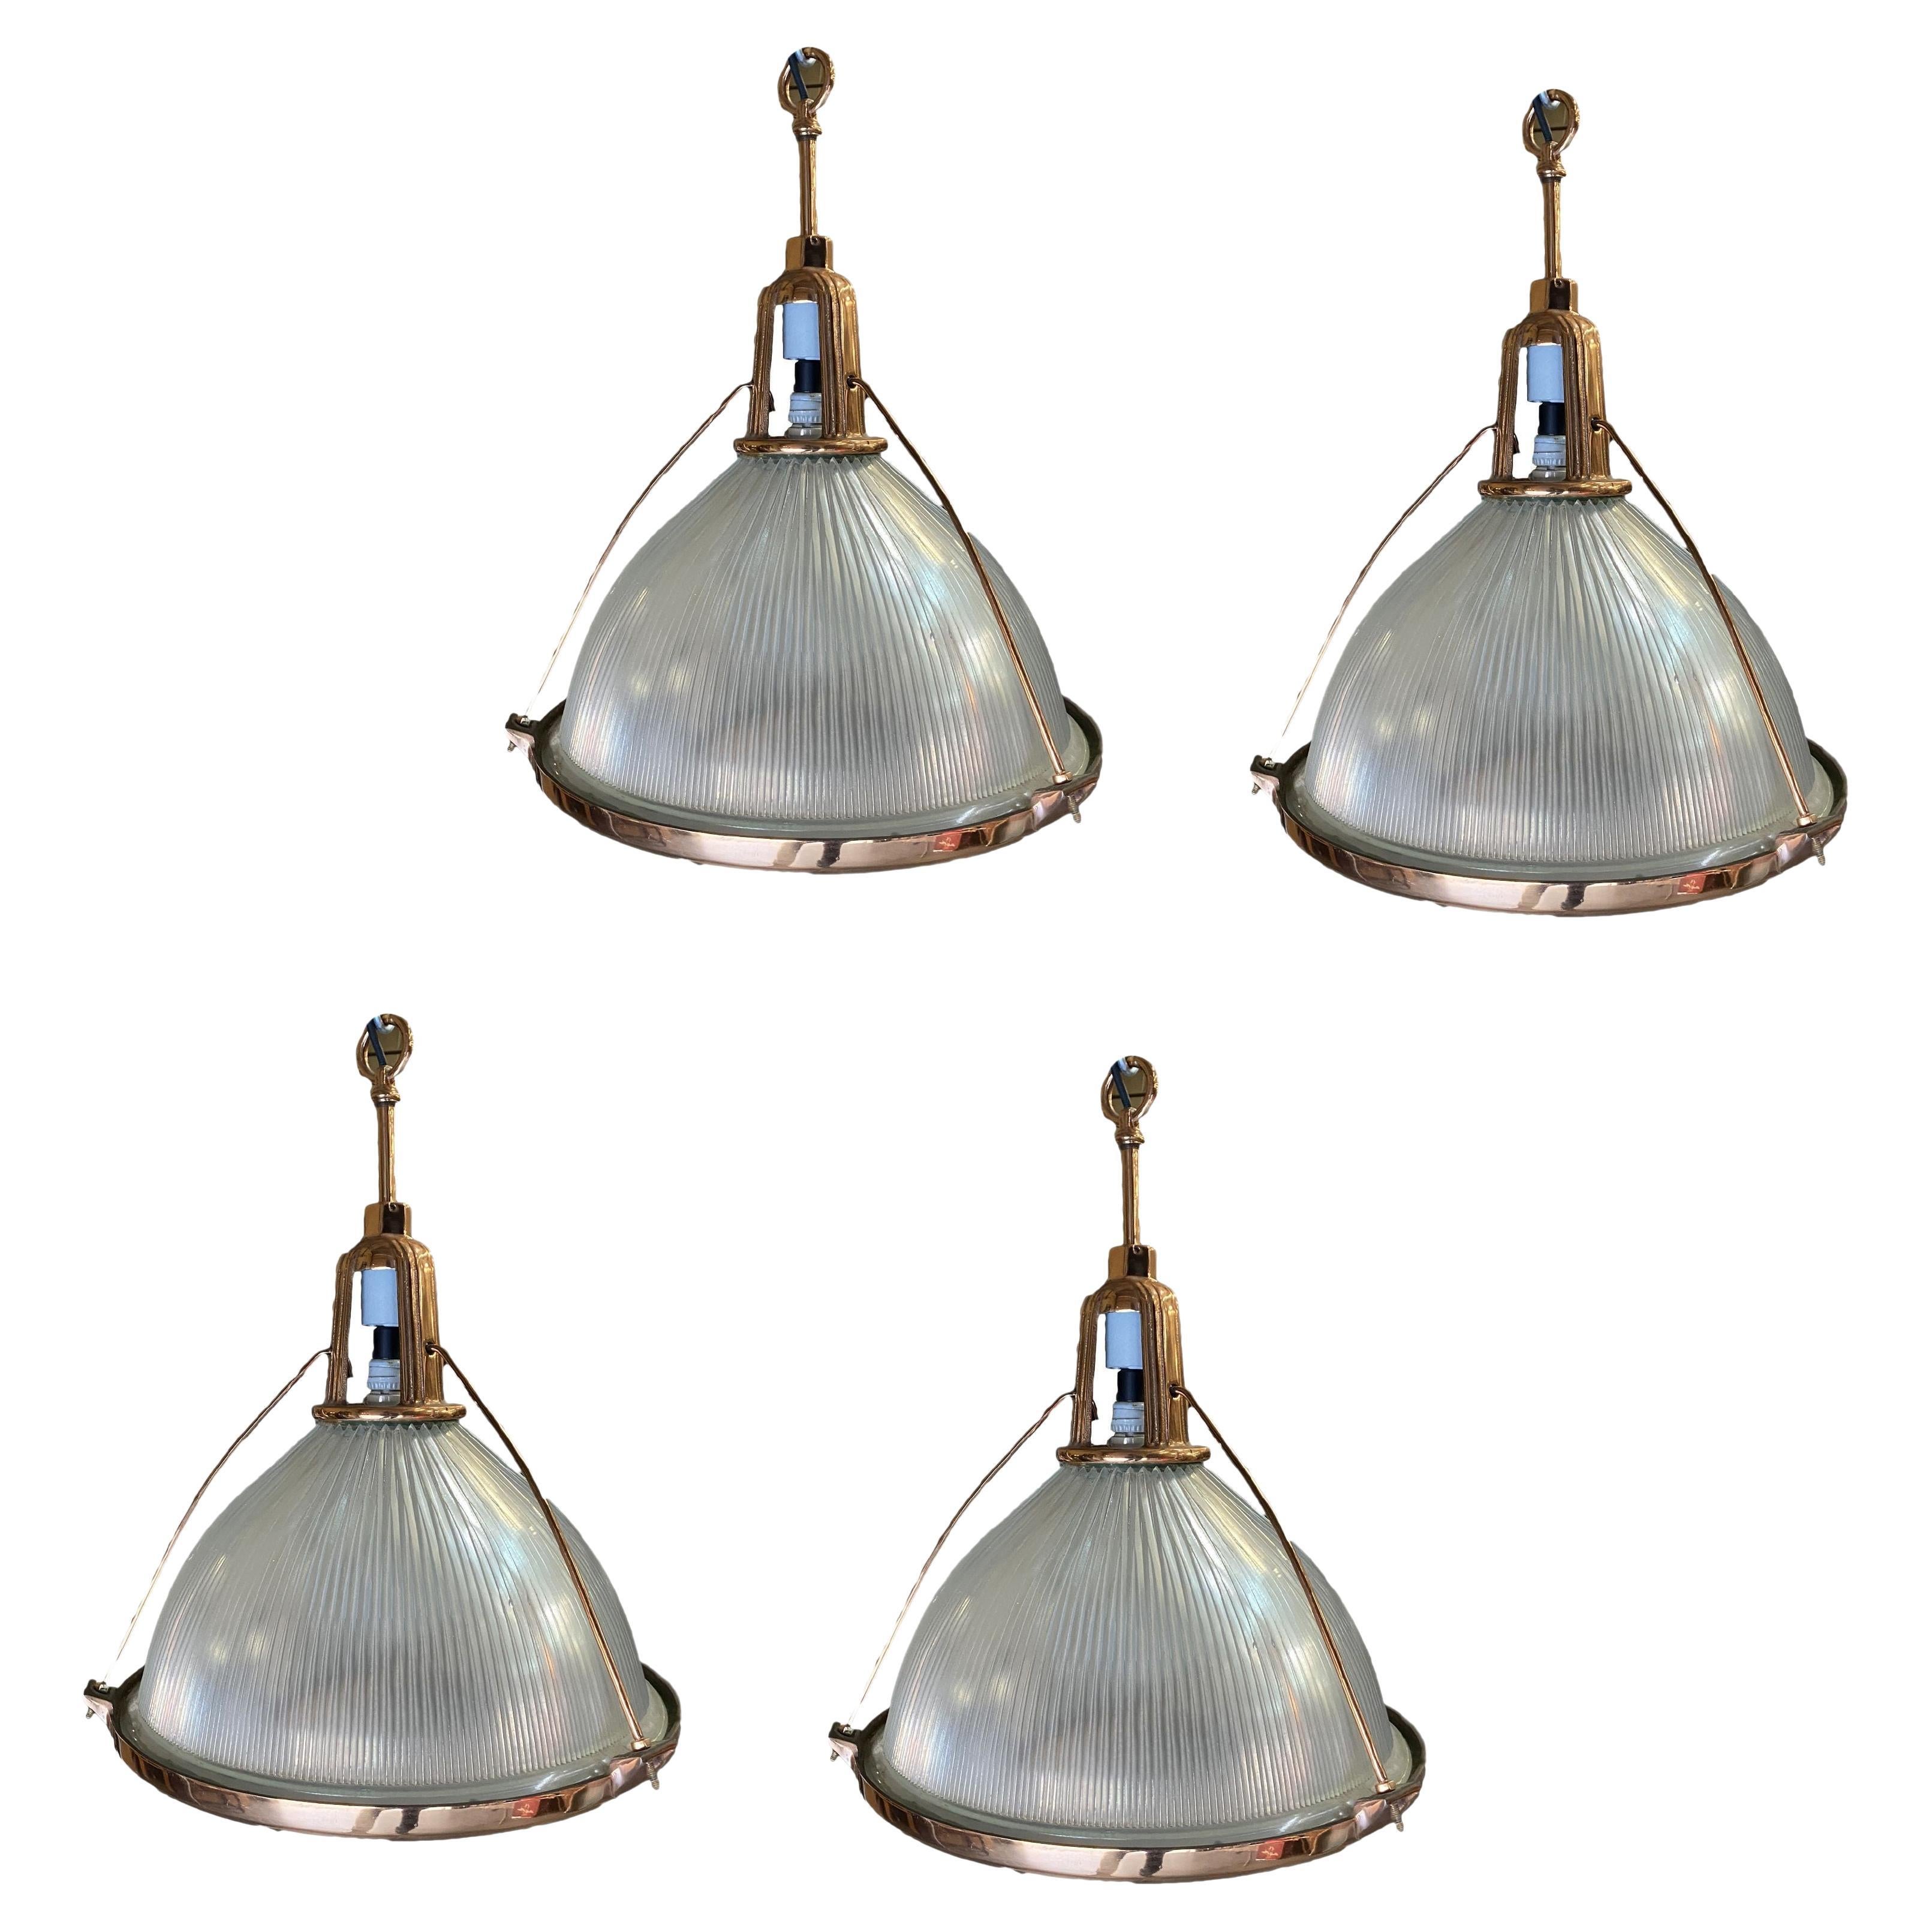 Rare Copper Plated Holophane Industrial Hanging Light Fixture, 4 Avail.